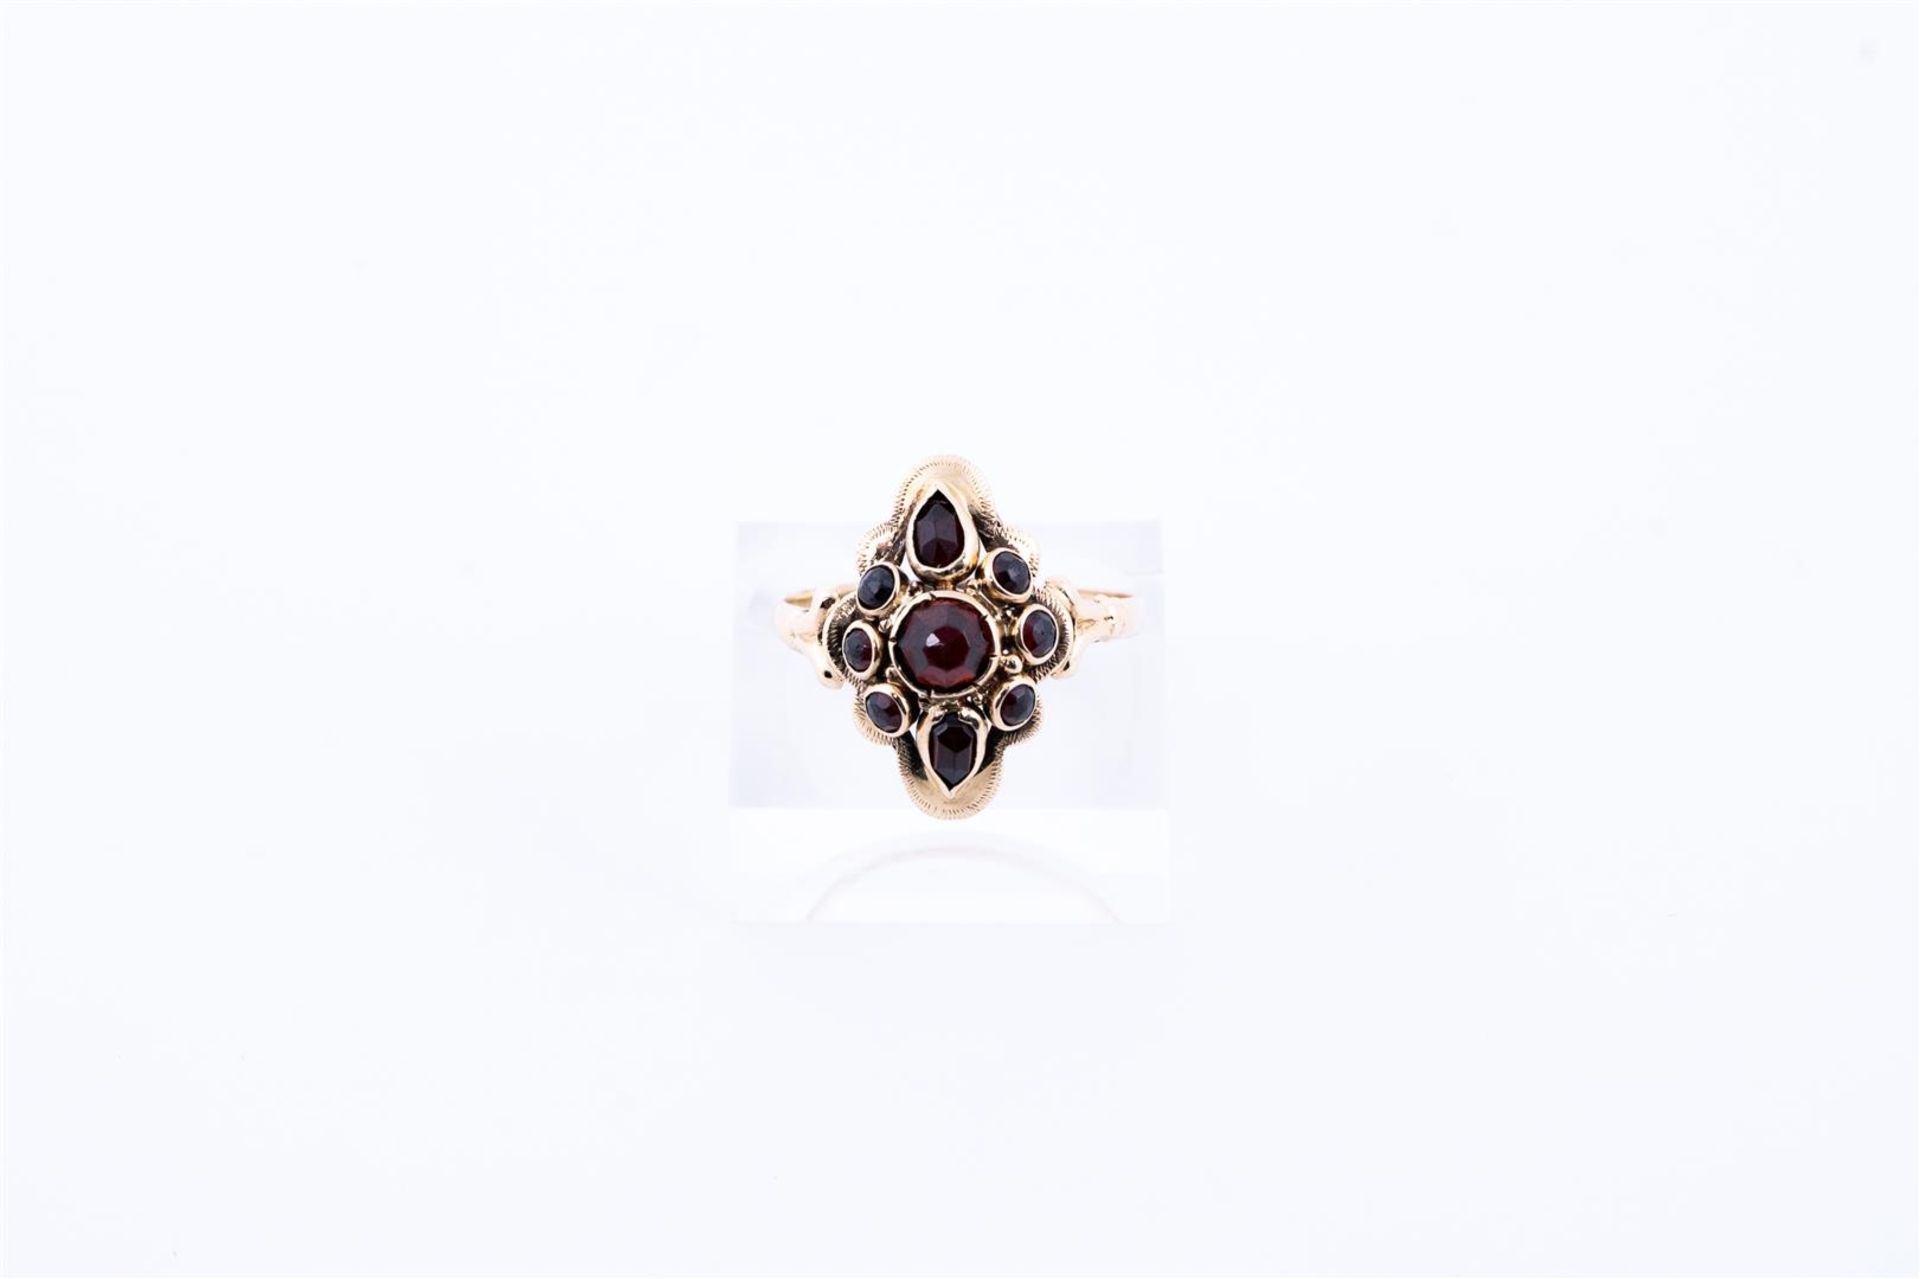 14kt yellow gold marquis ring set with garnet.
The ring is set with 1 rose cut central garnet of app - Bild 2 aus 3